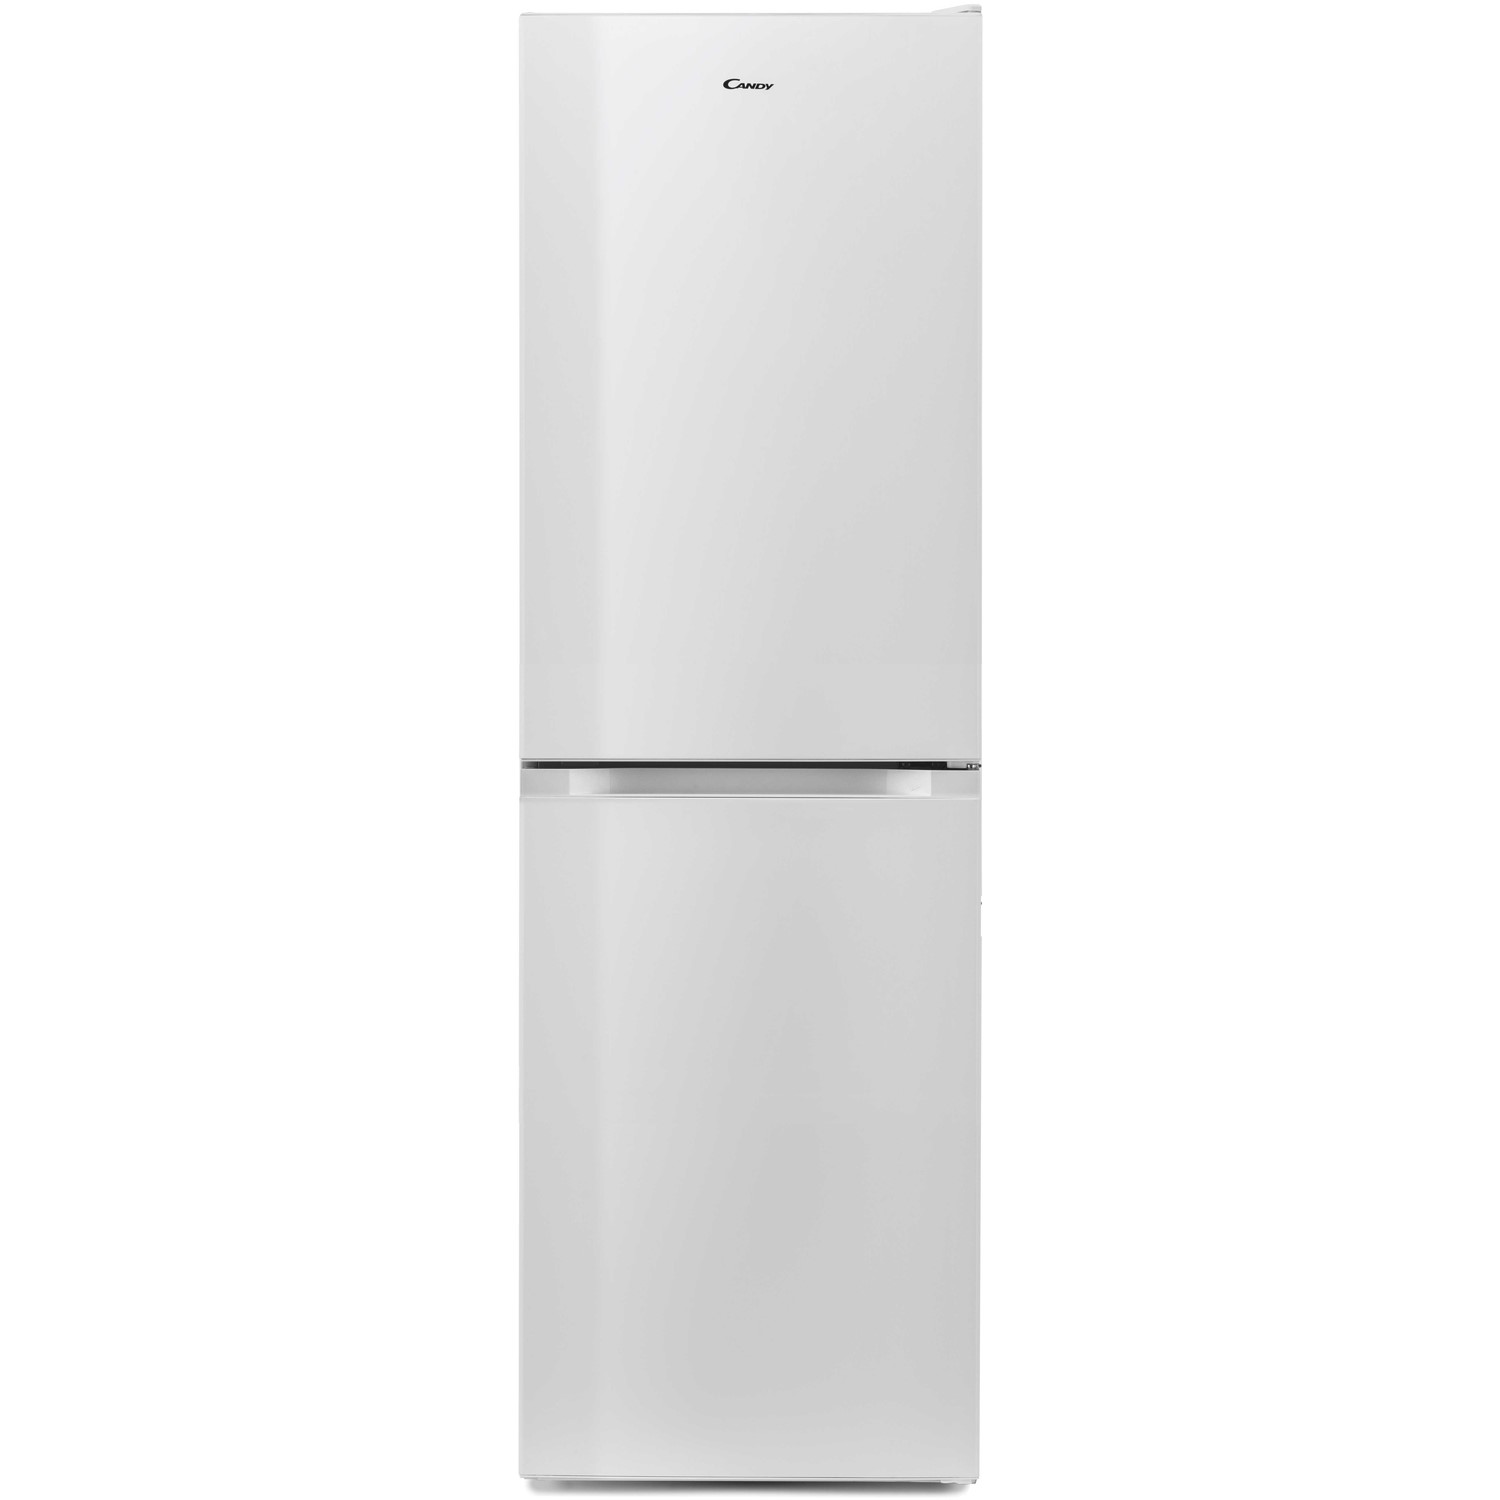 Refurbished Candy CMCL5172WKN Freestanding 253 Litre 50/50 Low Frost Fridge Freezer